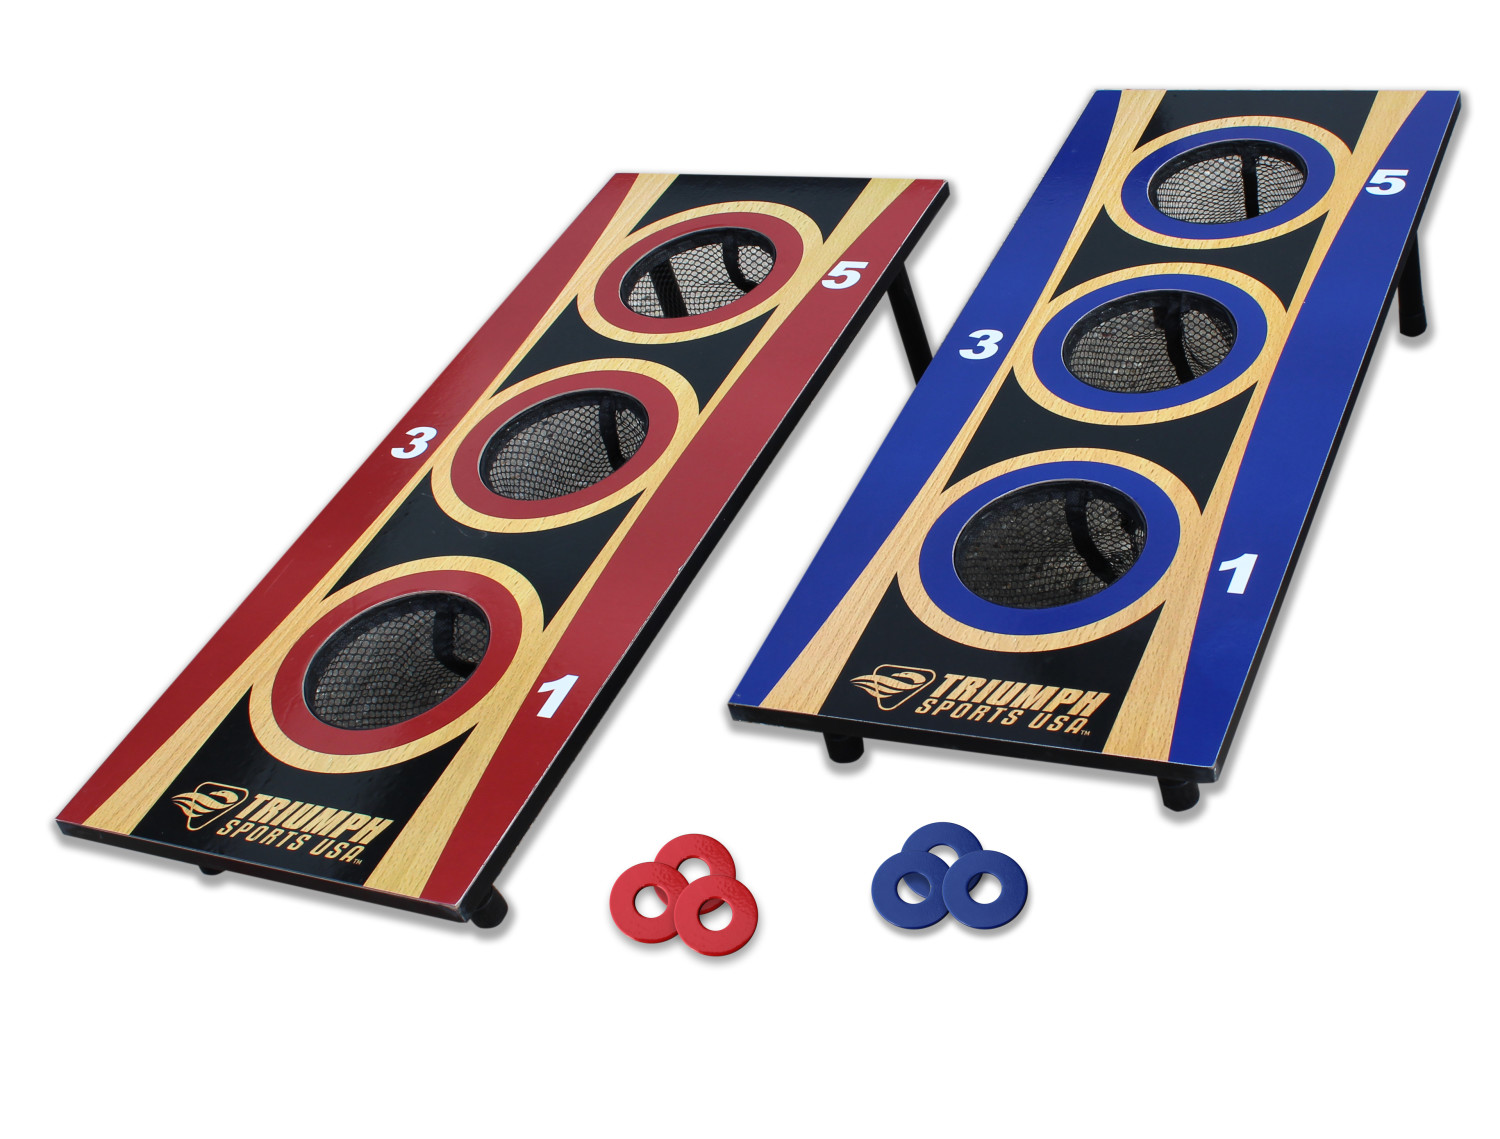 Triumph Tournament 2-in-1 Bag Toss and 3-Hole Washer Toss Combo with Bag  Toss Platforms, Bean Bags, Two 3-Hole Washer Boards with Nets and Steel  Washers